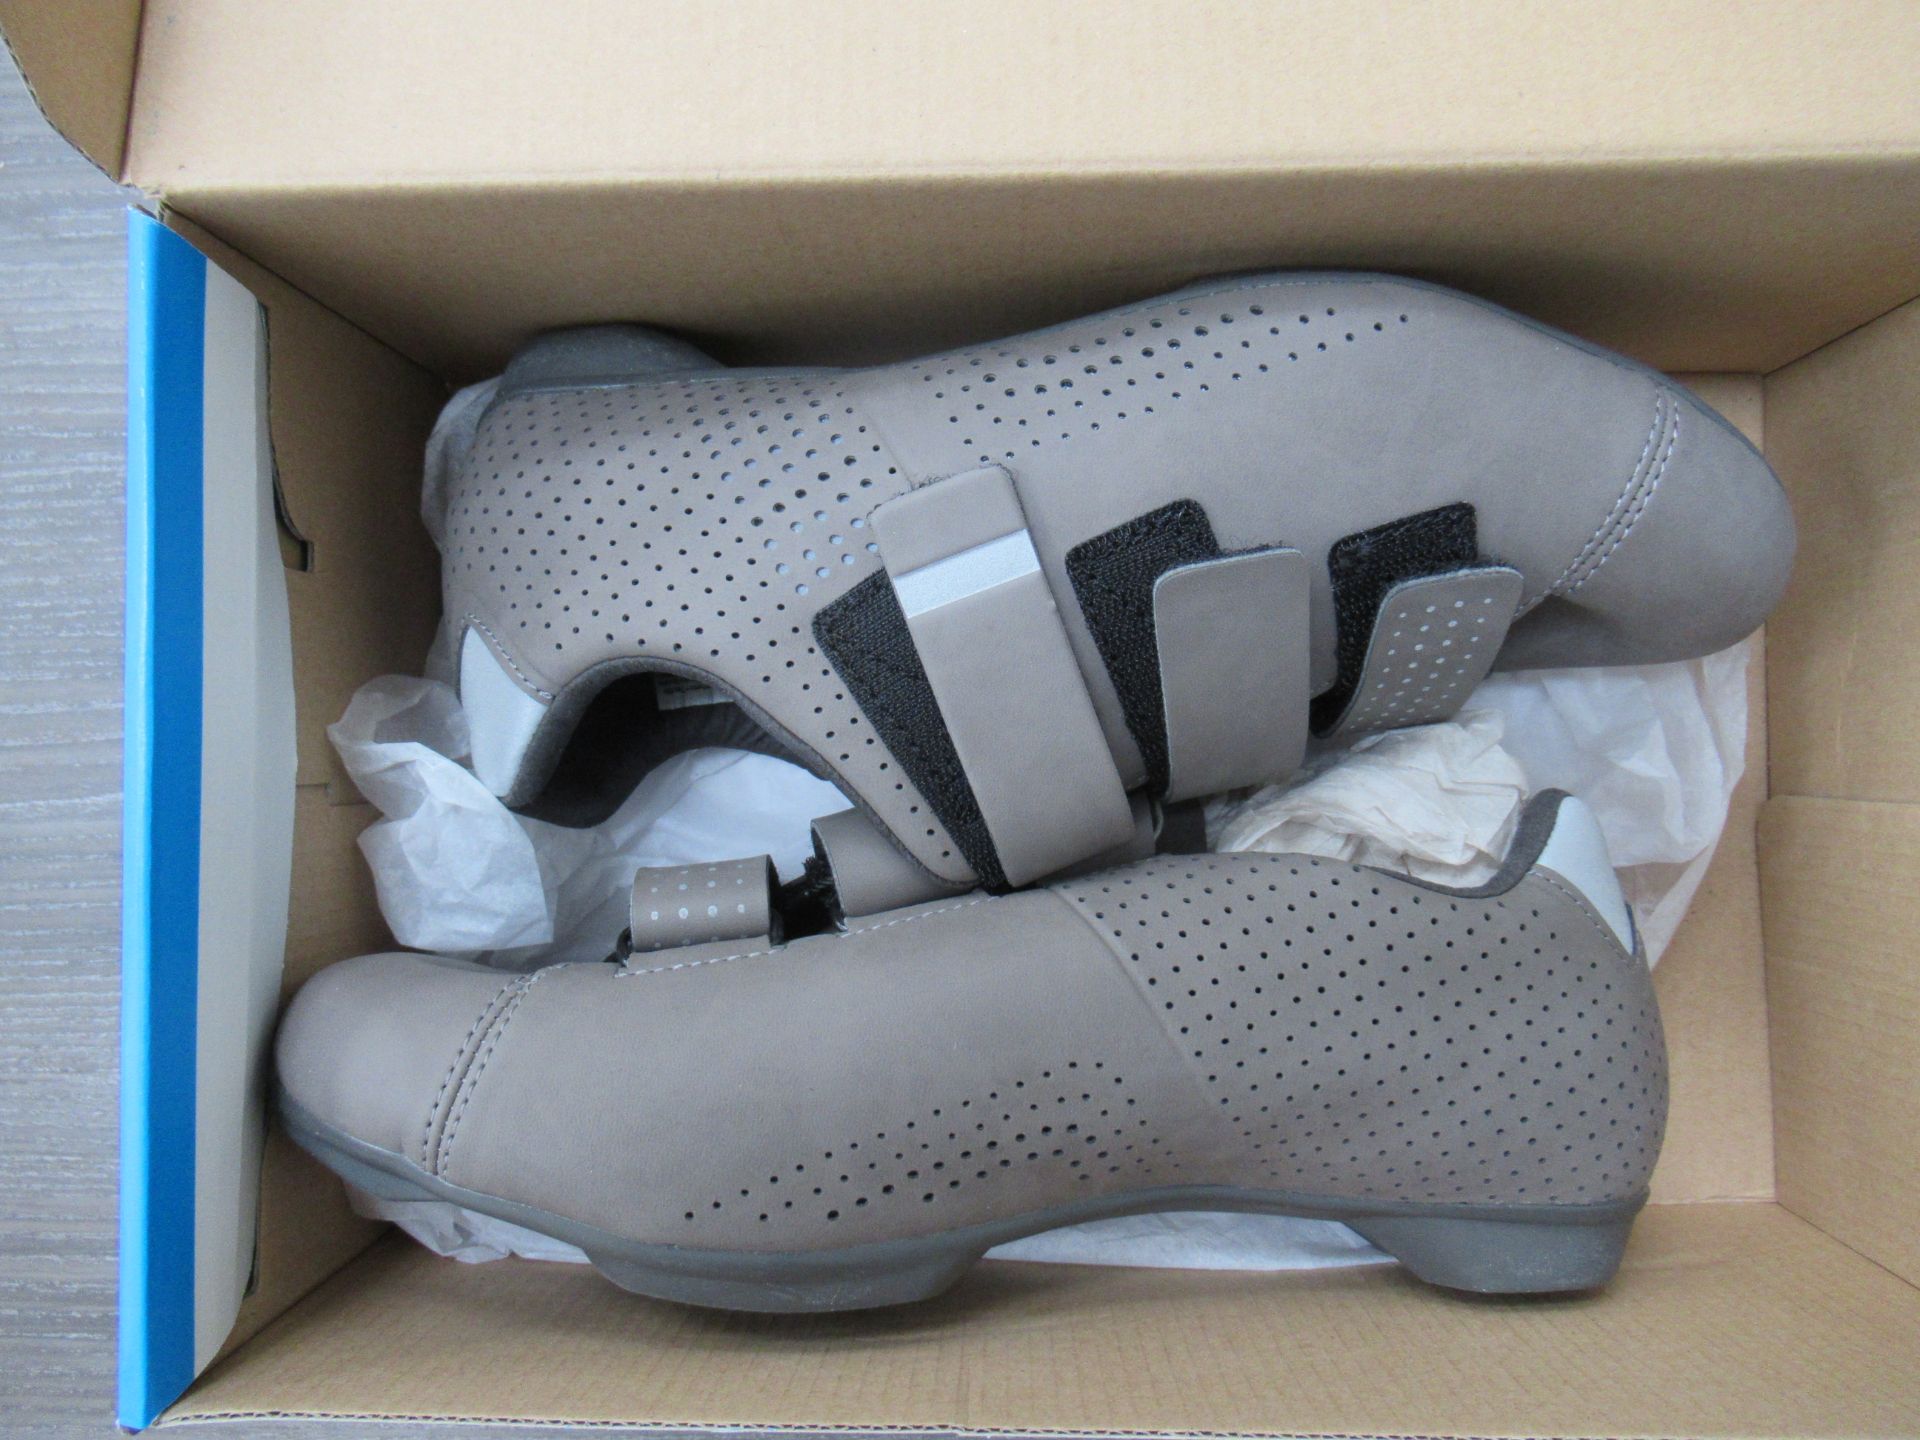 Pair of Shimano RT-5 ladies cycling shoes (brown) - boxed EU size 39 (RRP£89.99) - Image 4 of 4